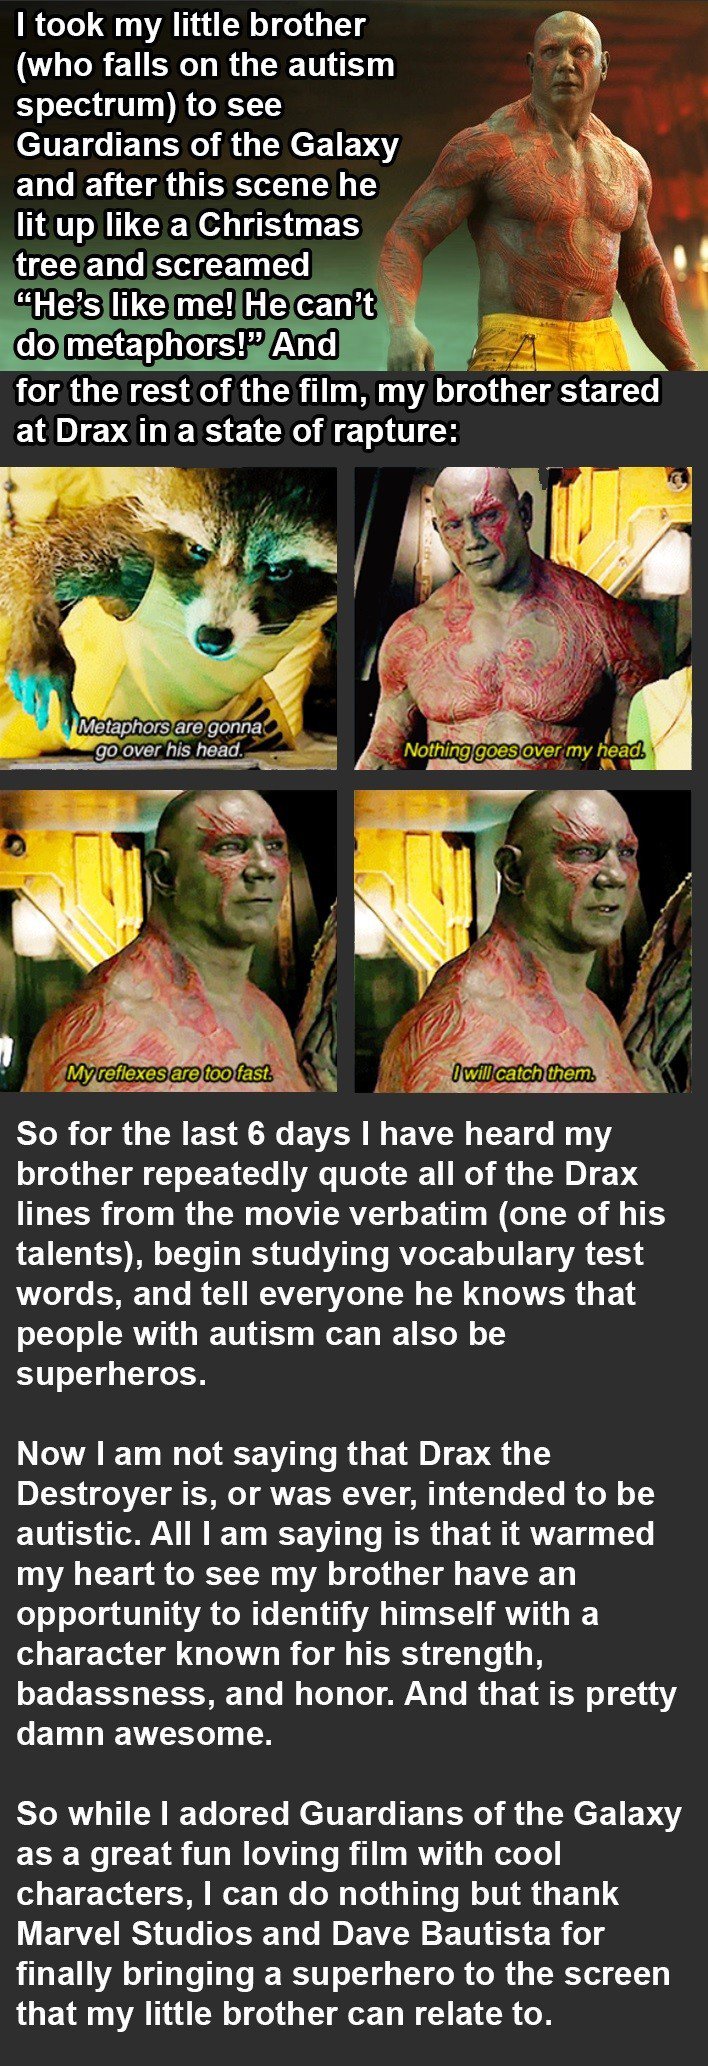 Drax from Guardians of the Galaxy is Role Model for Boy with Autism